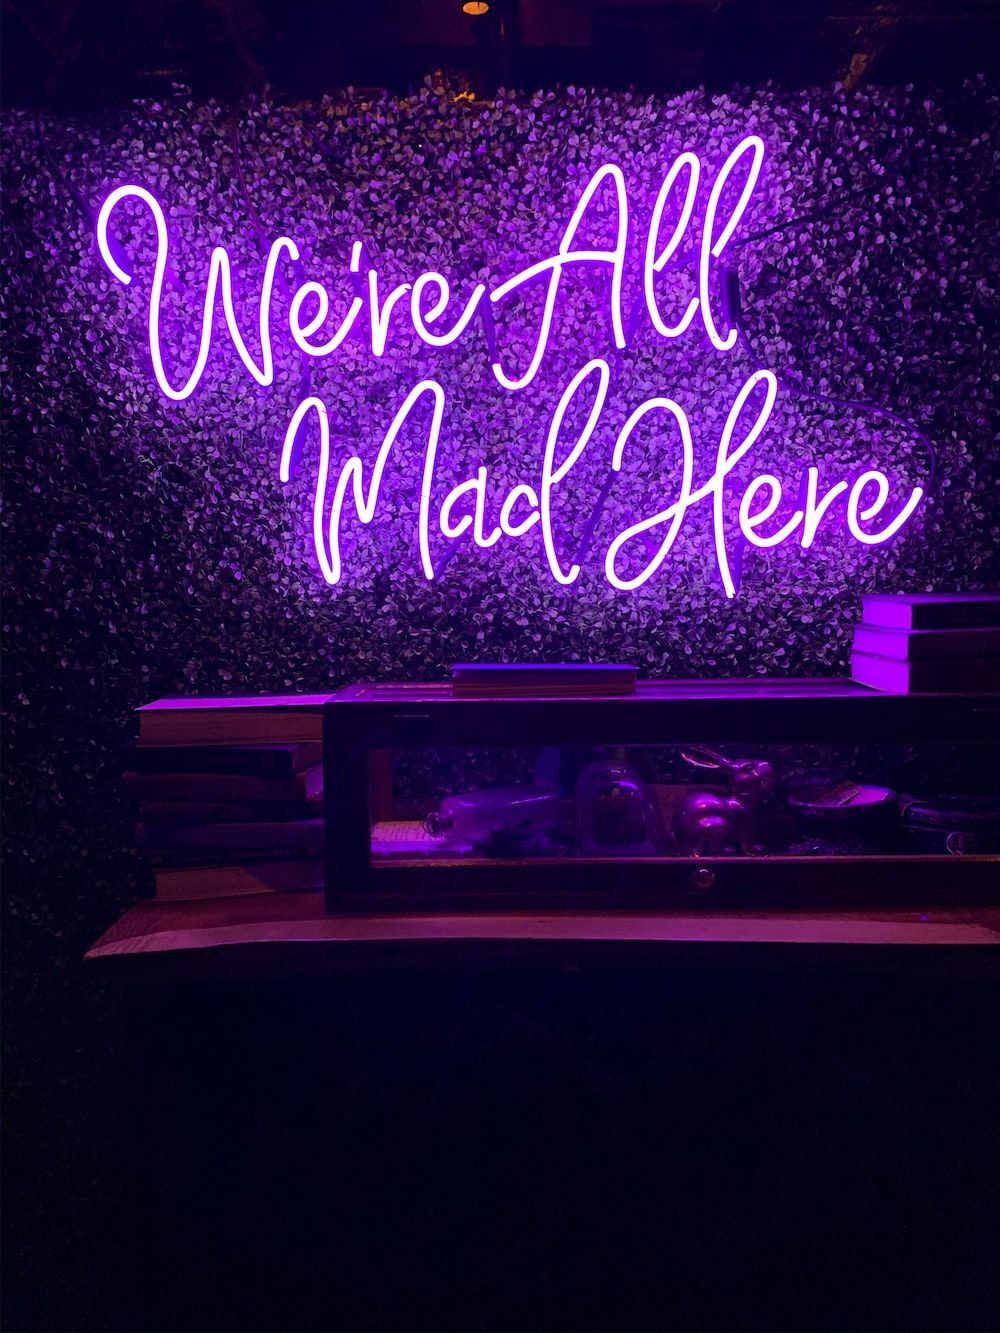 A purple neon sign that says 